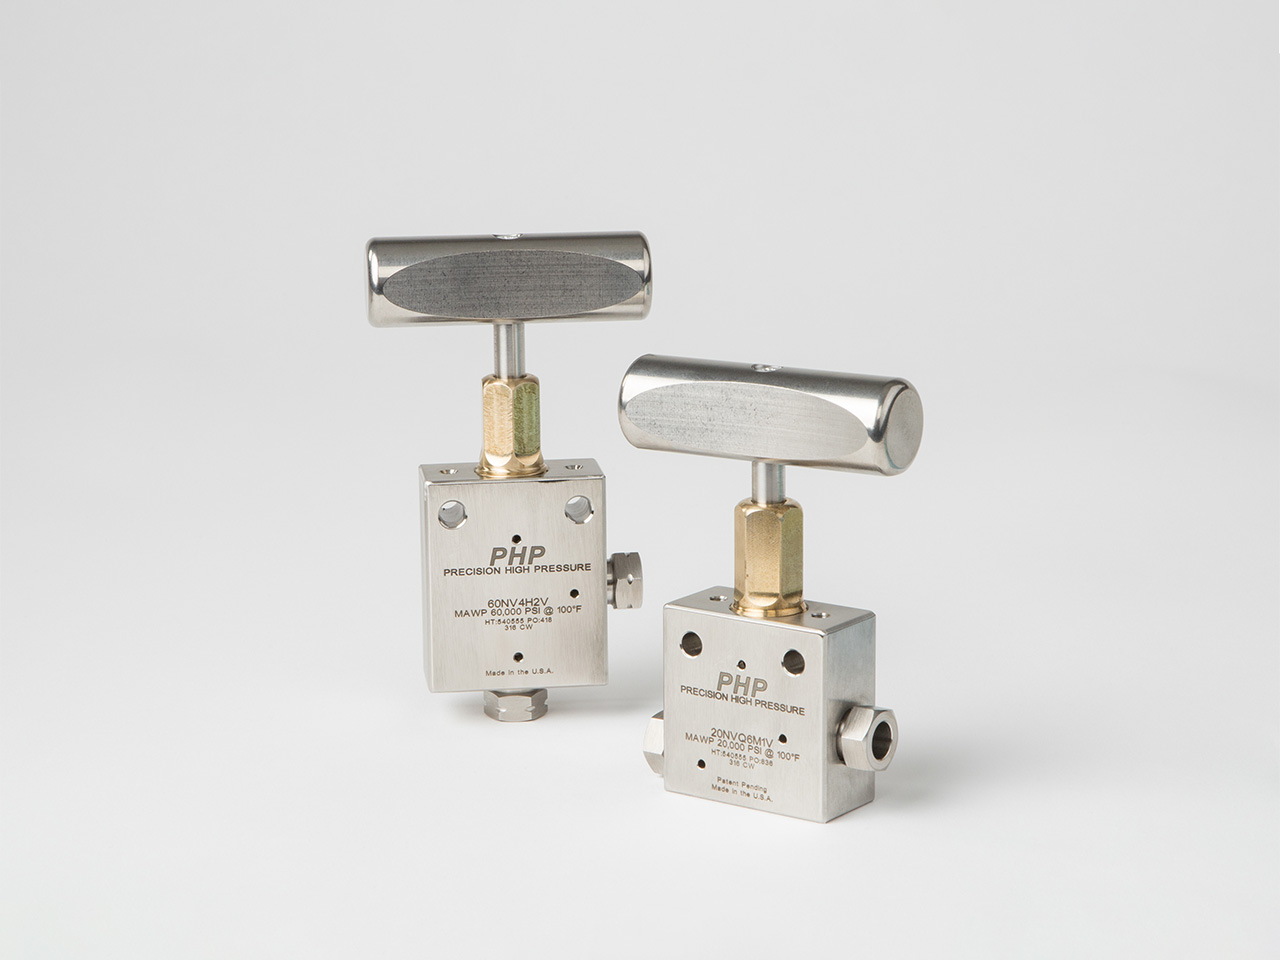 Manual and actuated high pressure valves